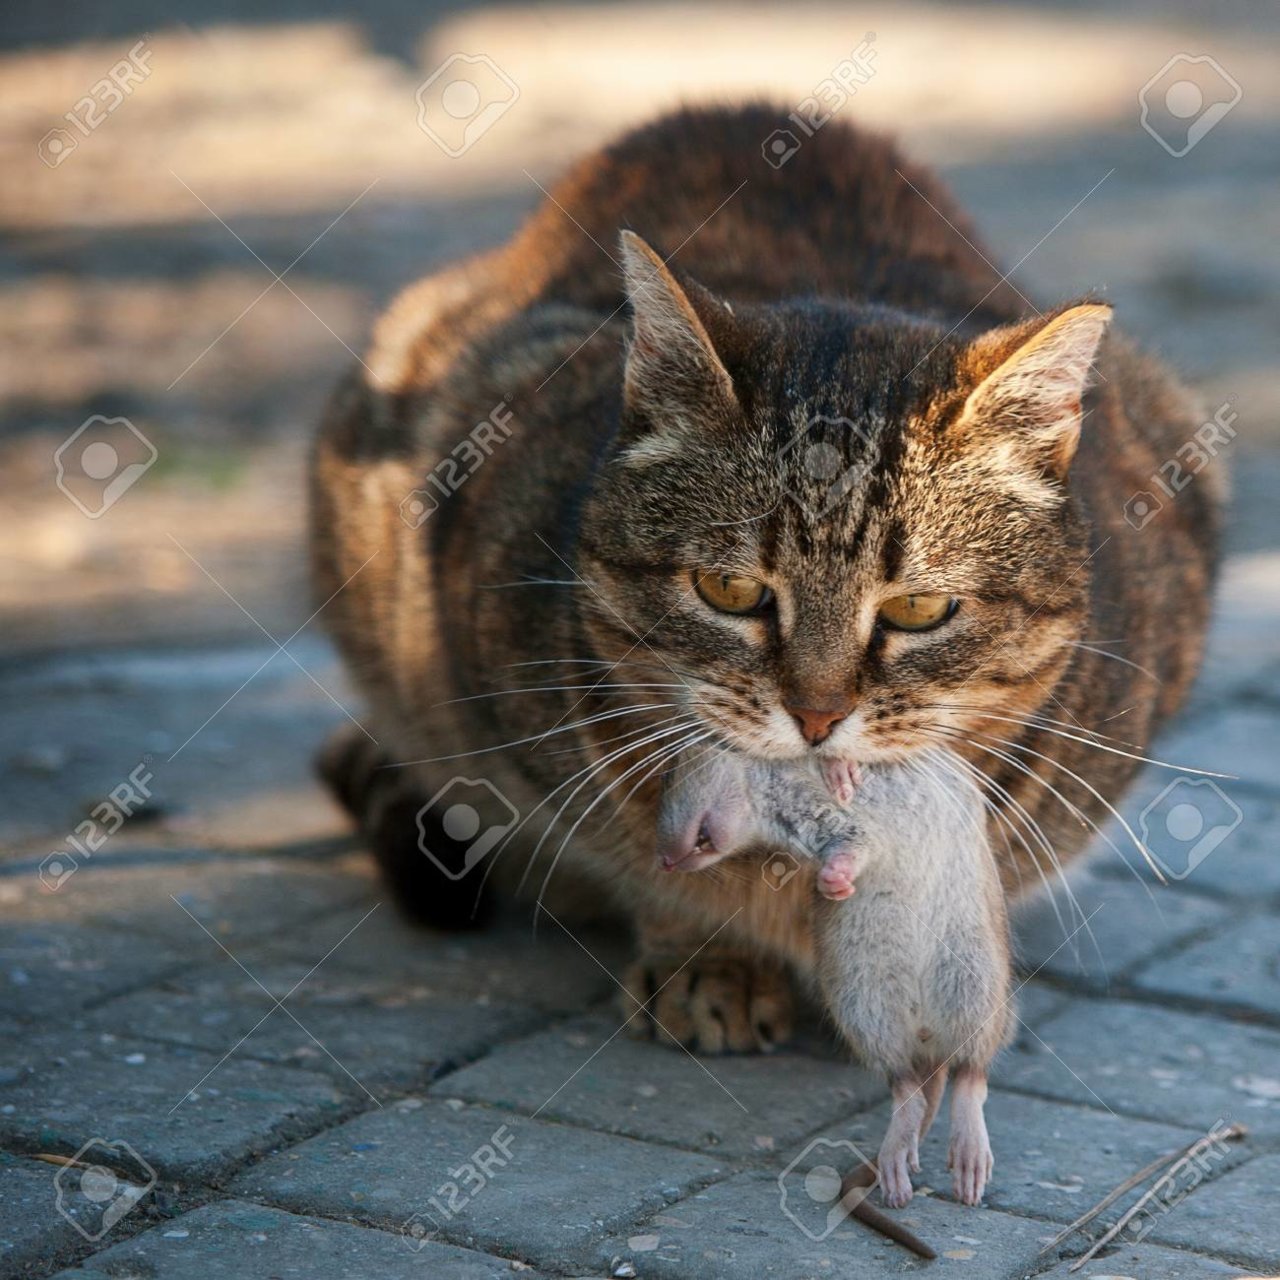 99962640-cat-caught-a-rat-and-holds-it-in-his-mouth-.jpg